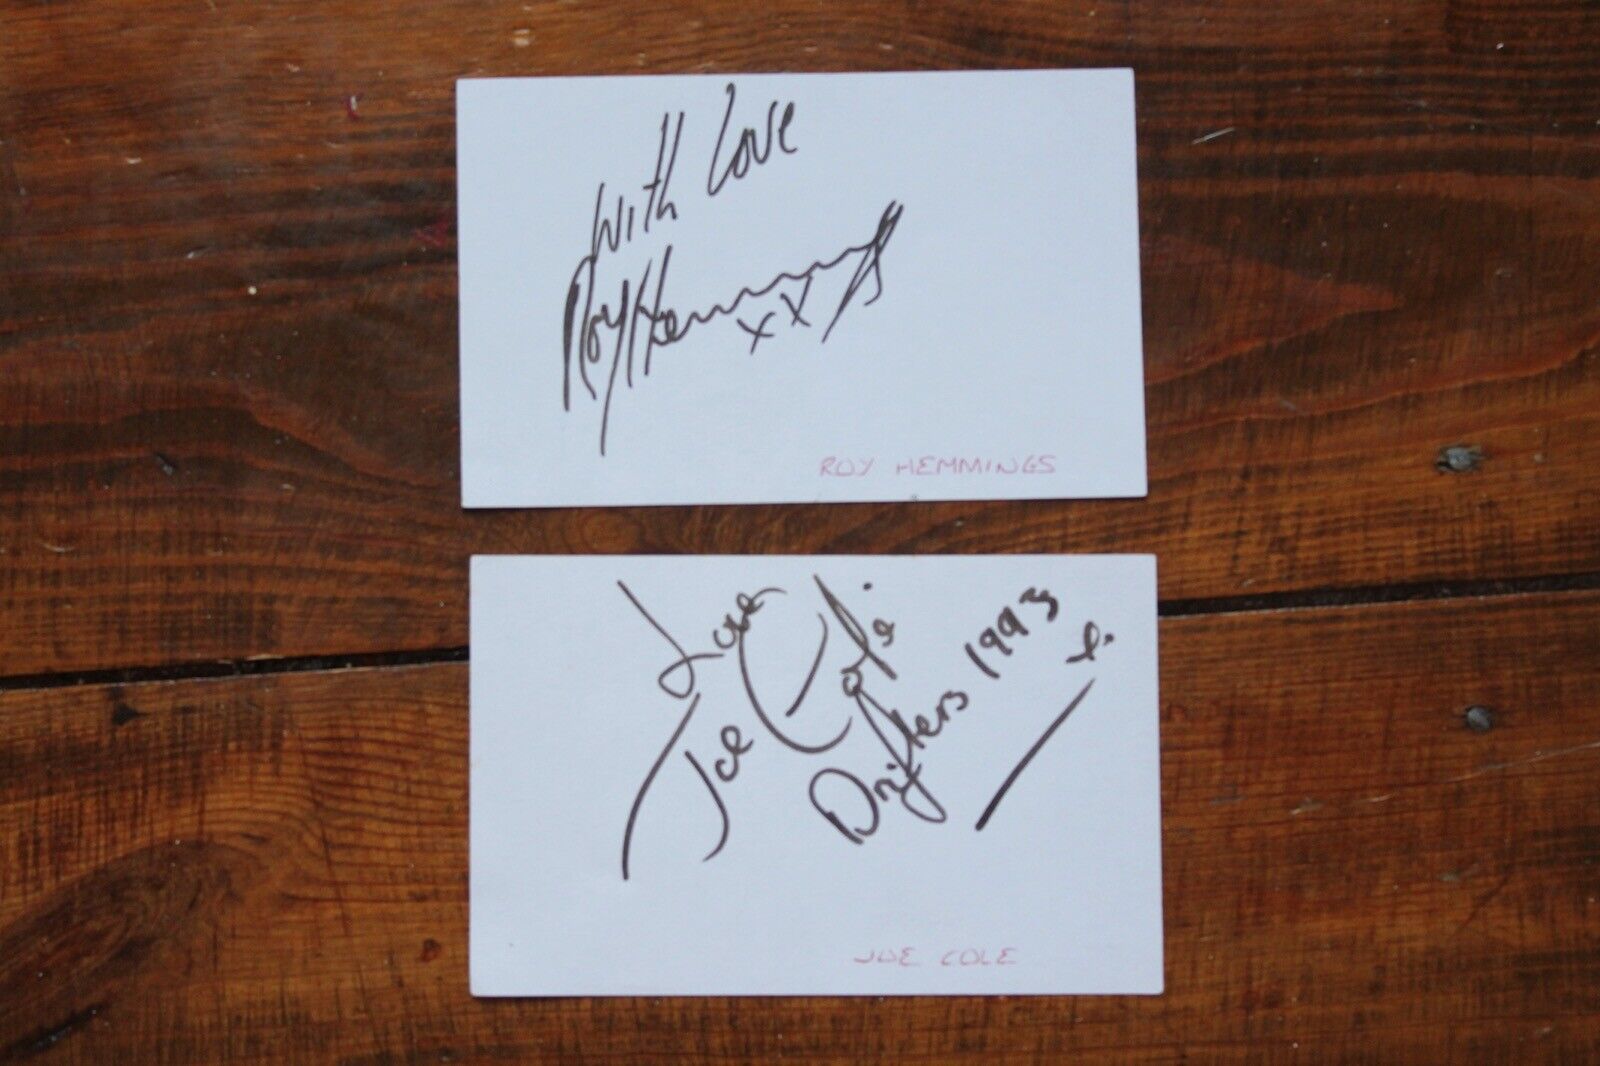 2x DRIFTERS Hand SIGNED 5.5x3.5” Index Cards ROY HEMMINGS & JOE COLE Soul 1993